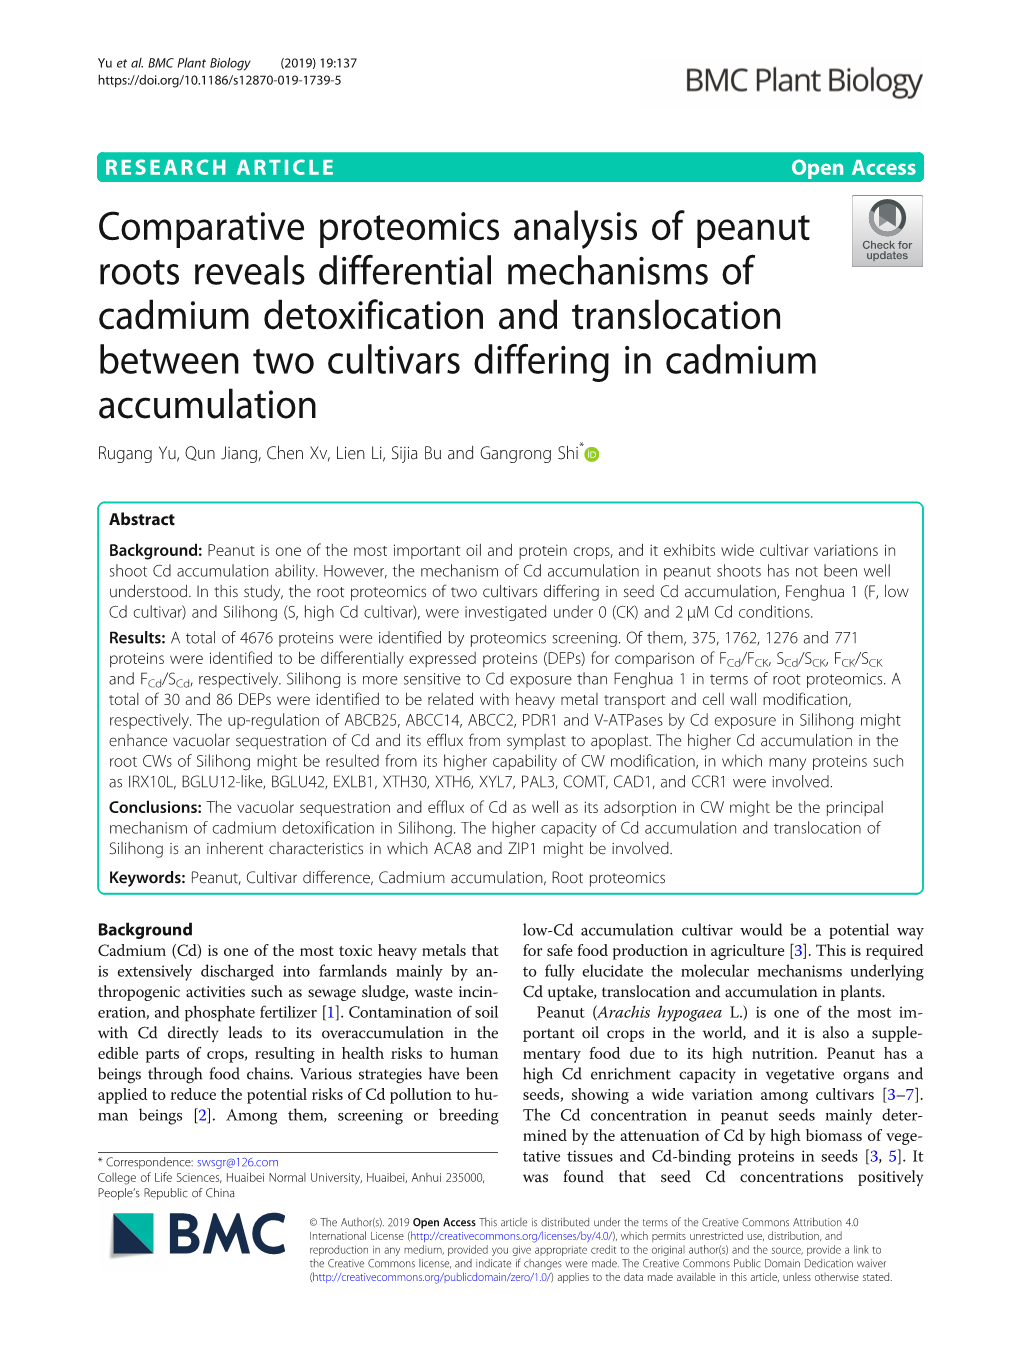 Comparative Proteomics Analysis of Peanut Roots Reveals Differential